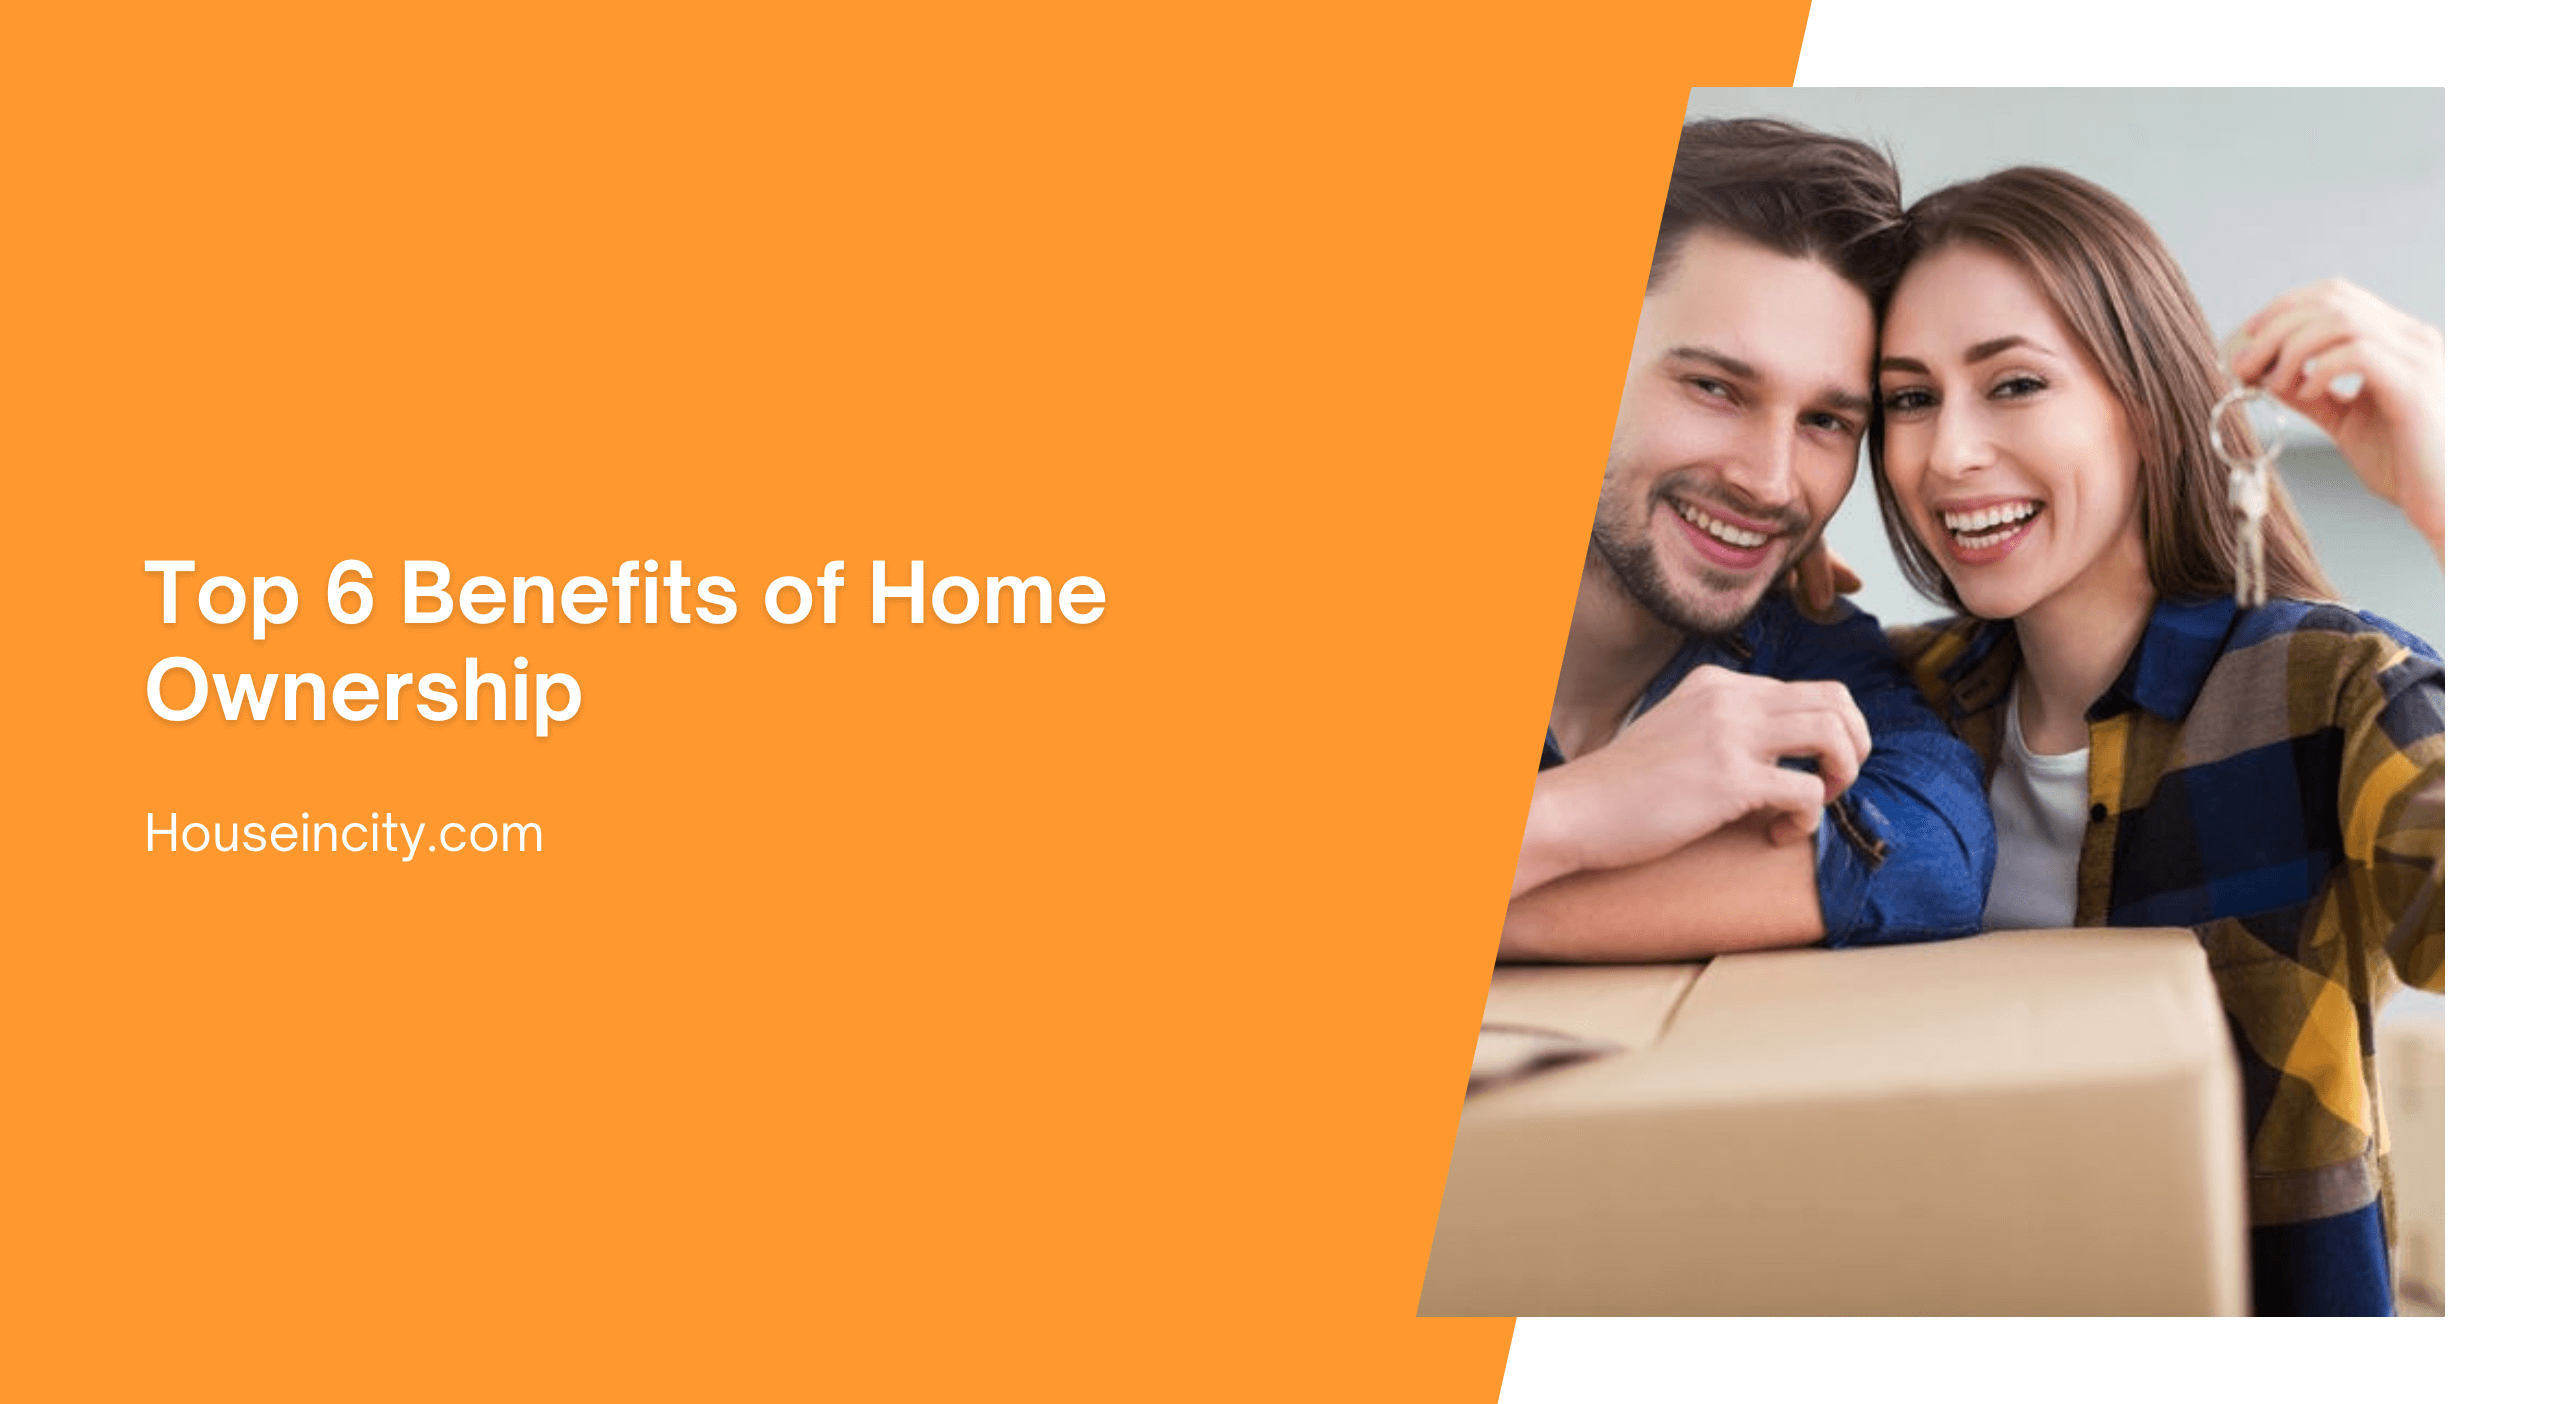 Top 6 Benefits of Home Ownership